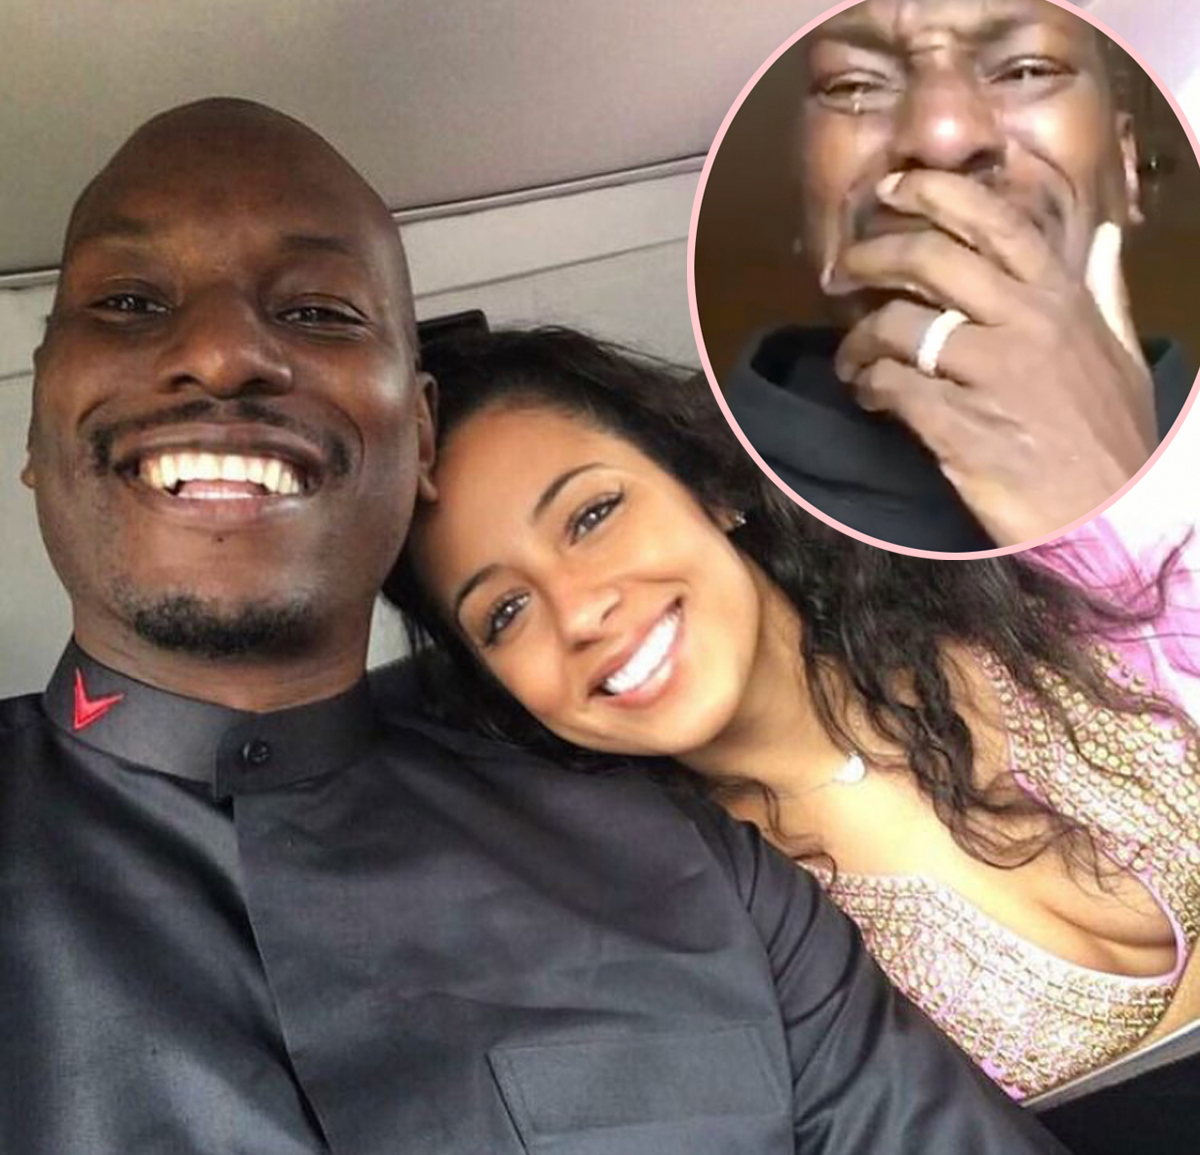 Tyrese Splits With Wife Samantha After 4 Years - And Blames It On 'Black  Families' & 'Broken Homes'?! - Perez Hilton